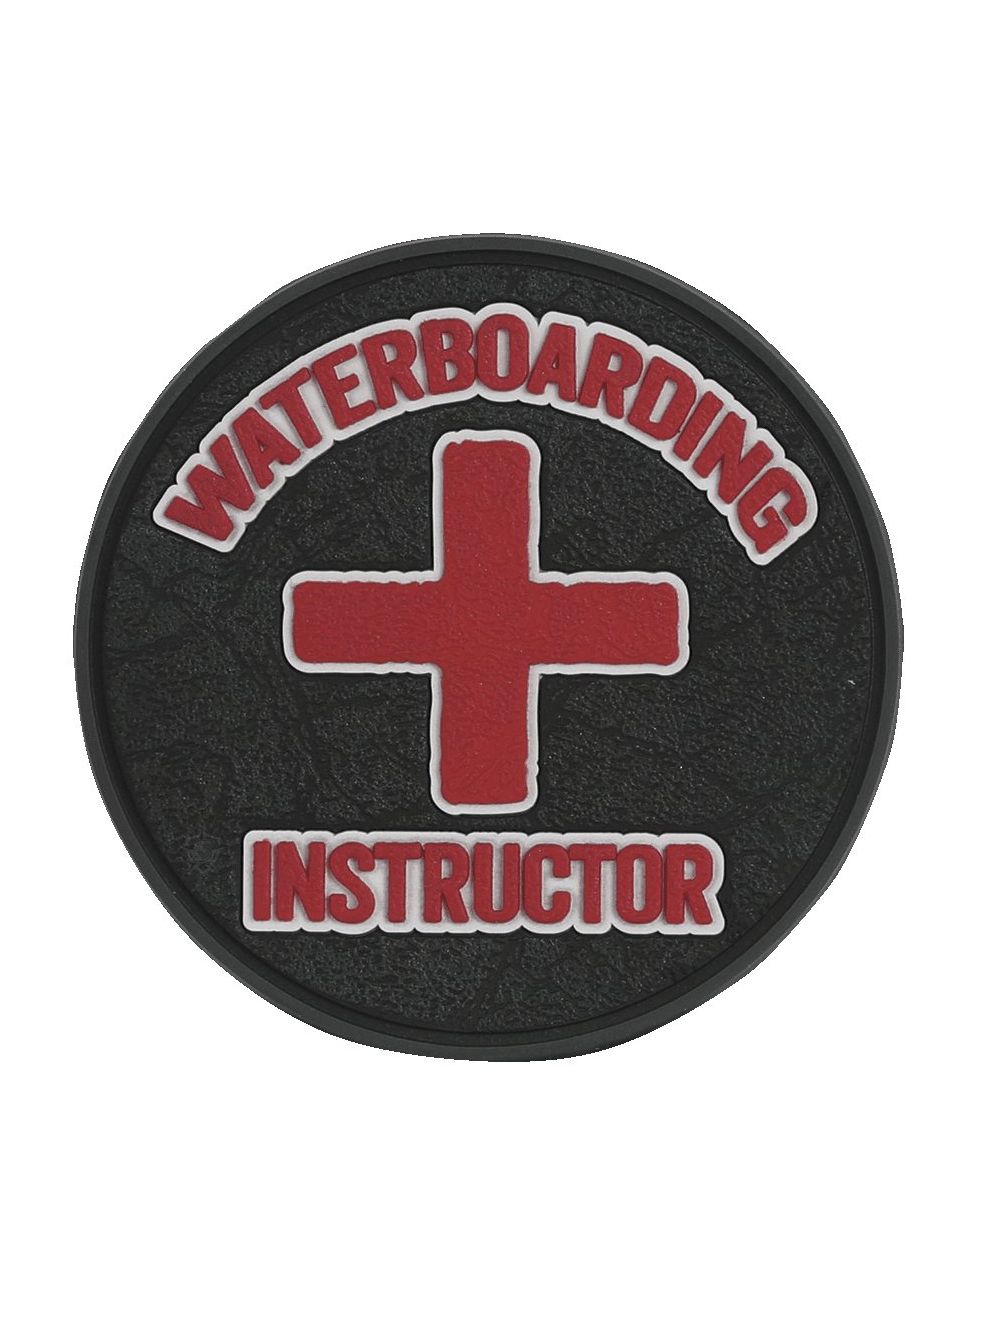 Waterboarding Morale Patch